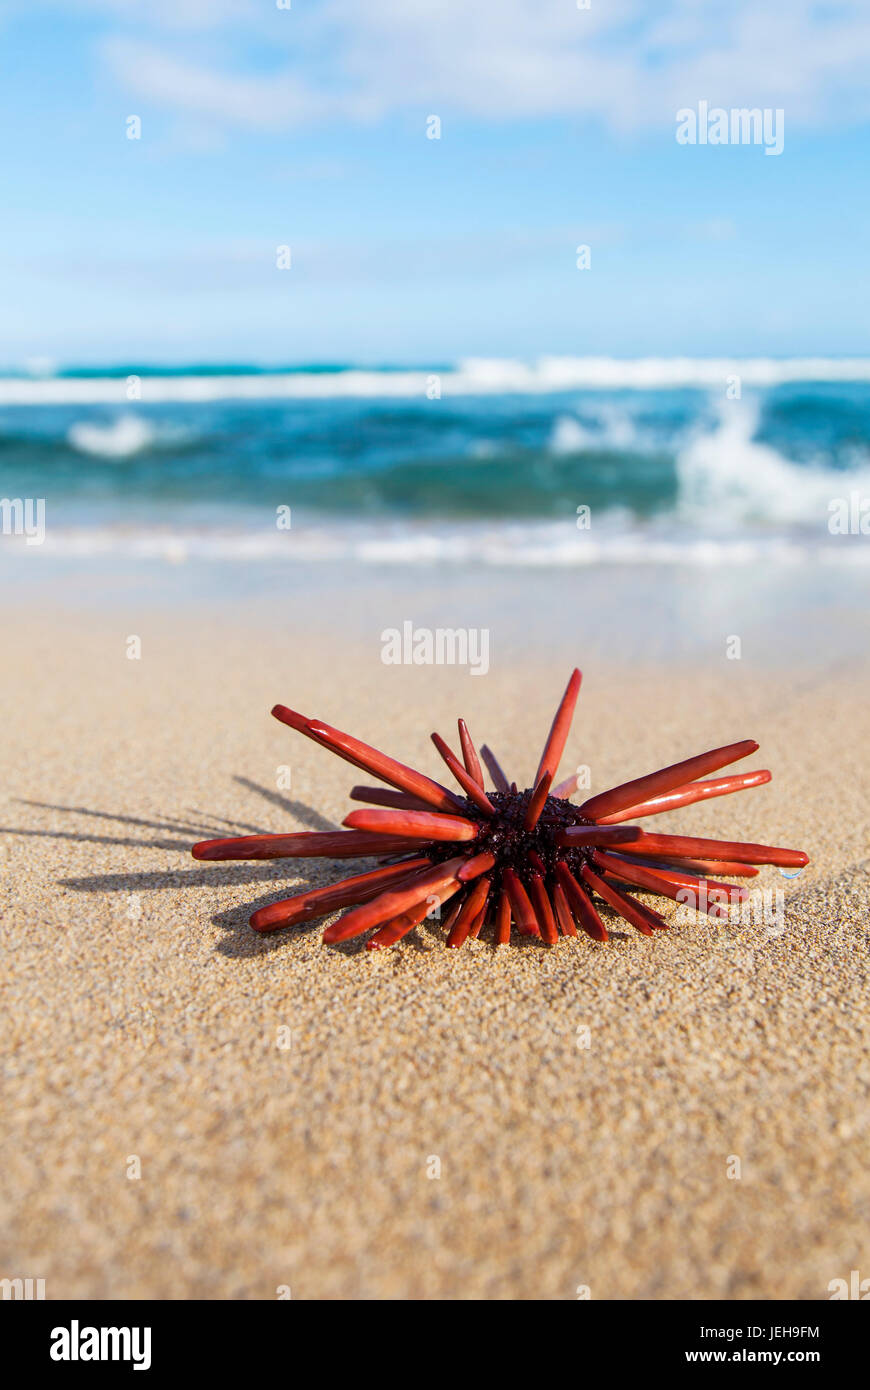 A Red Slate Pencil Urchin (Heterocentrotus Mamillatus) sounds on the sand at the beach; Honolulu, Oahu, Hawaii, United States of America Stock Photo